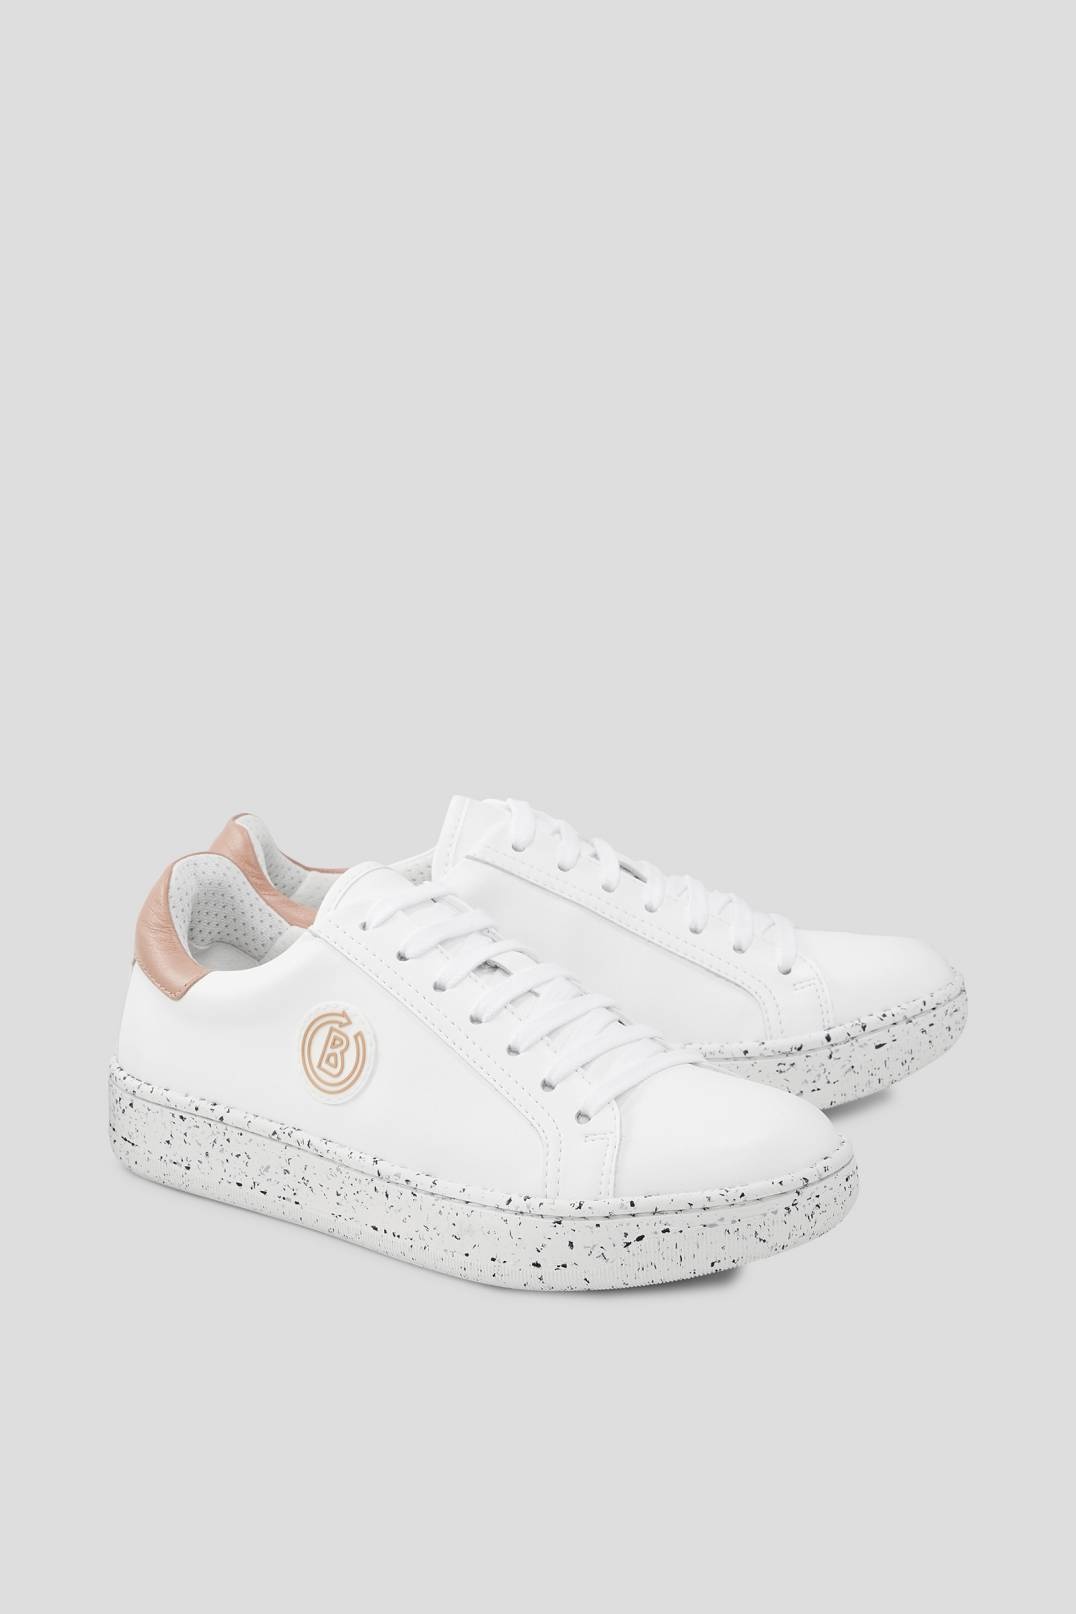 MALMÖ SUSTAINABLE SNEAKERS IN WHITE/PINK - 3